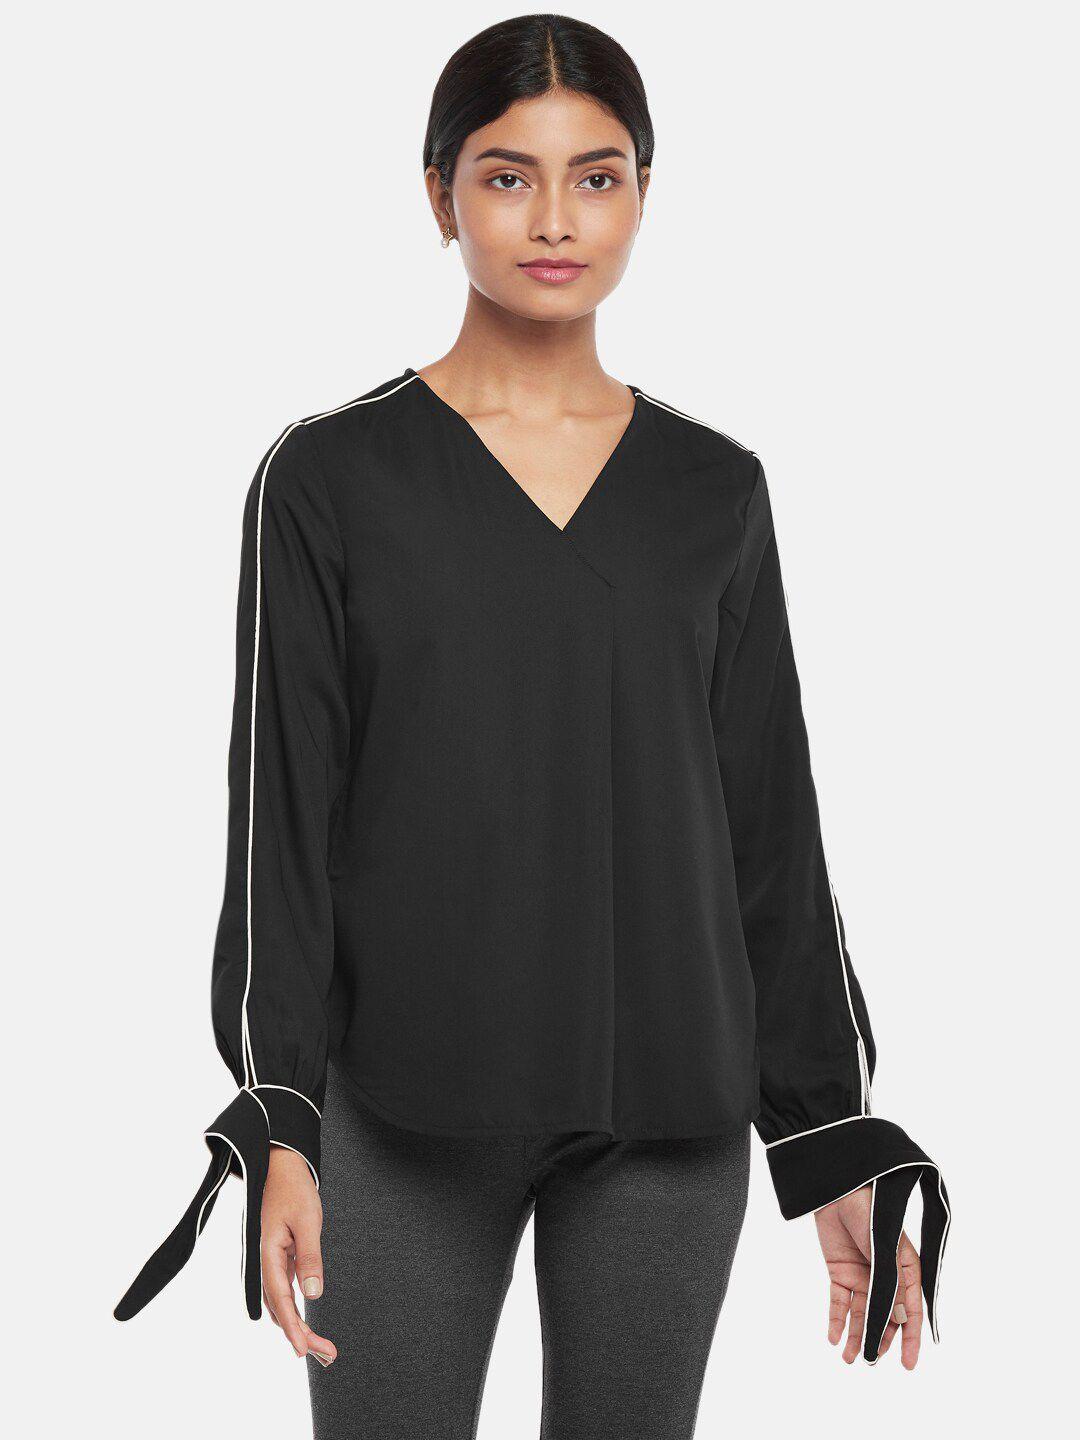 annabelle by pantaloons black wrap top